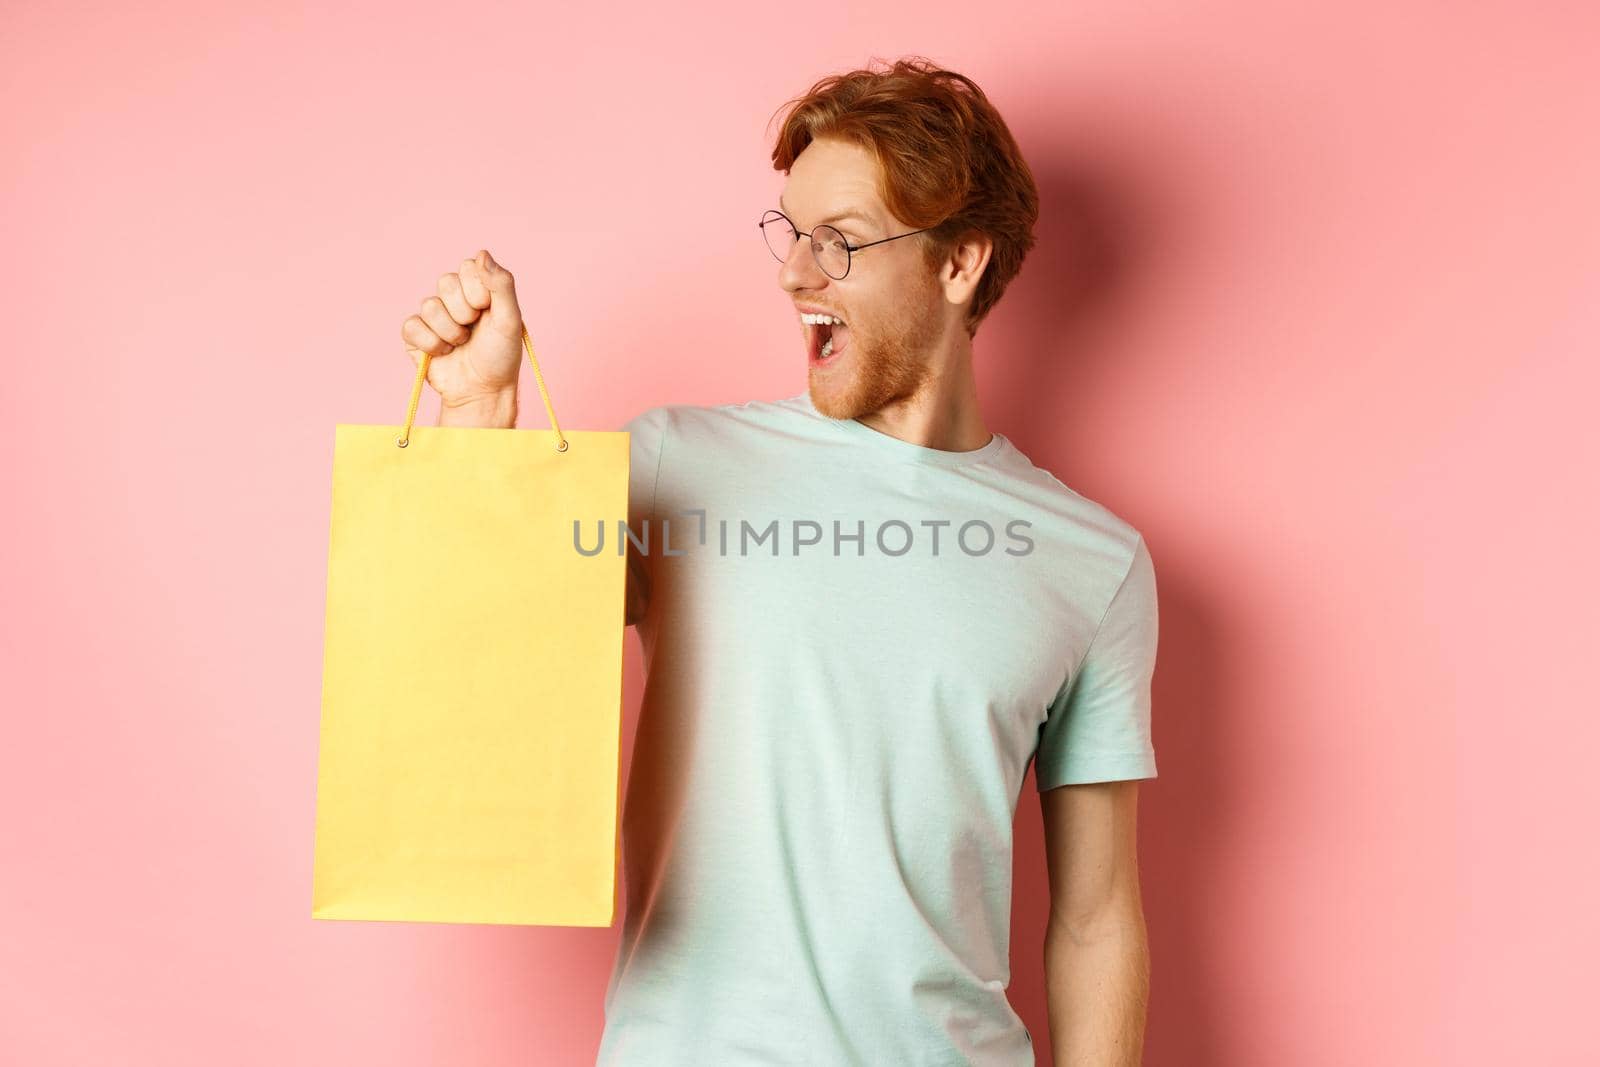 Handsome young man buying presents, holding shopping bag and looking amused, standing over pink background.